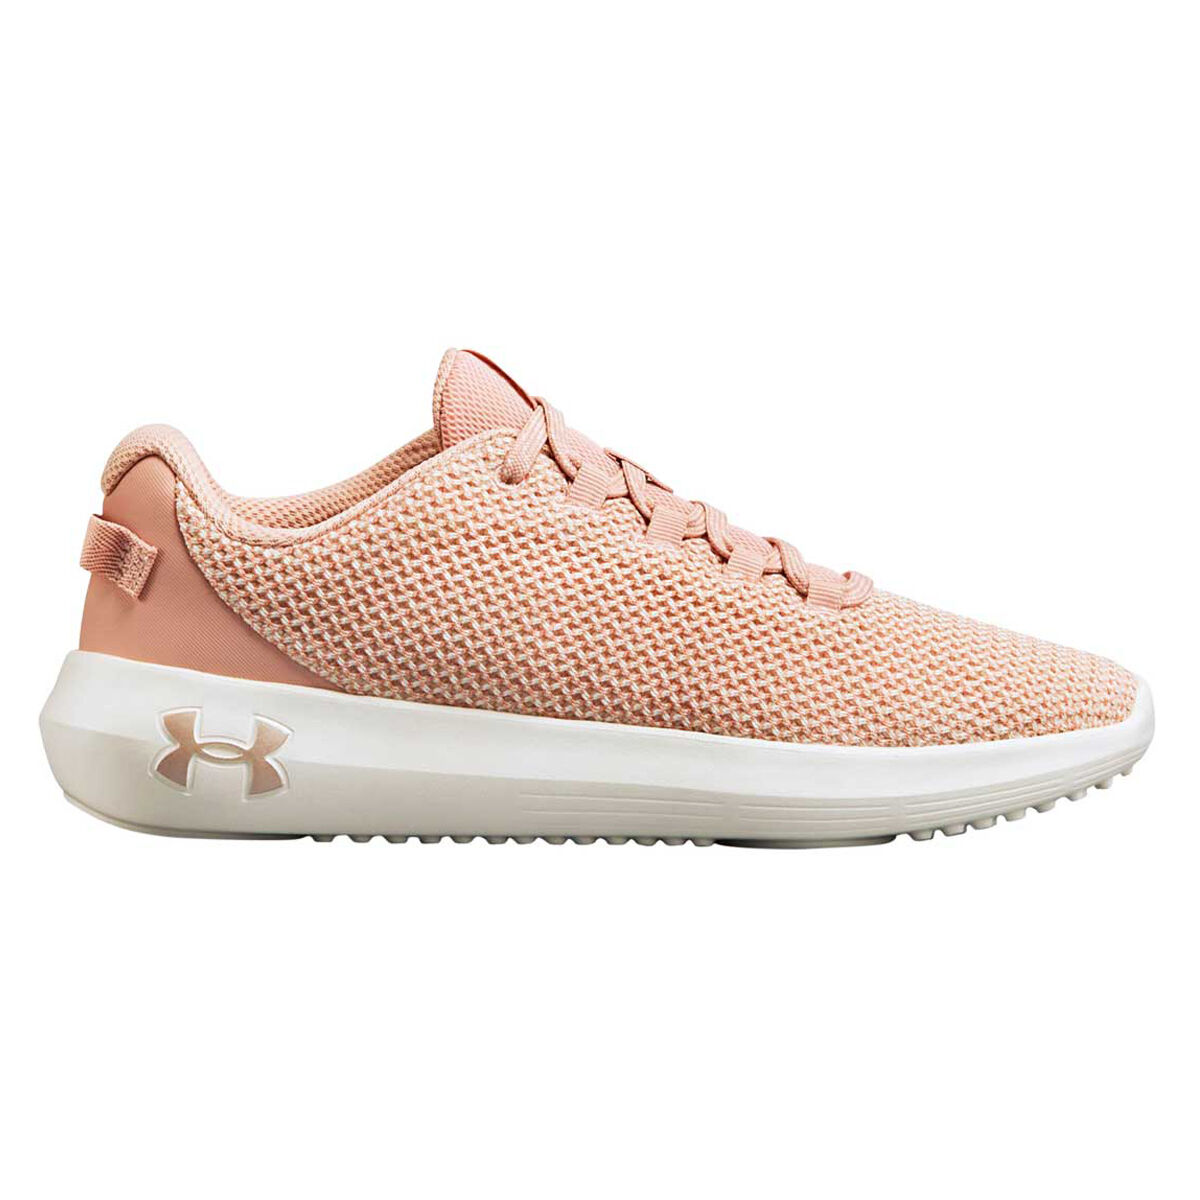 under armour women's ripple training shoes